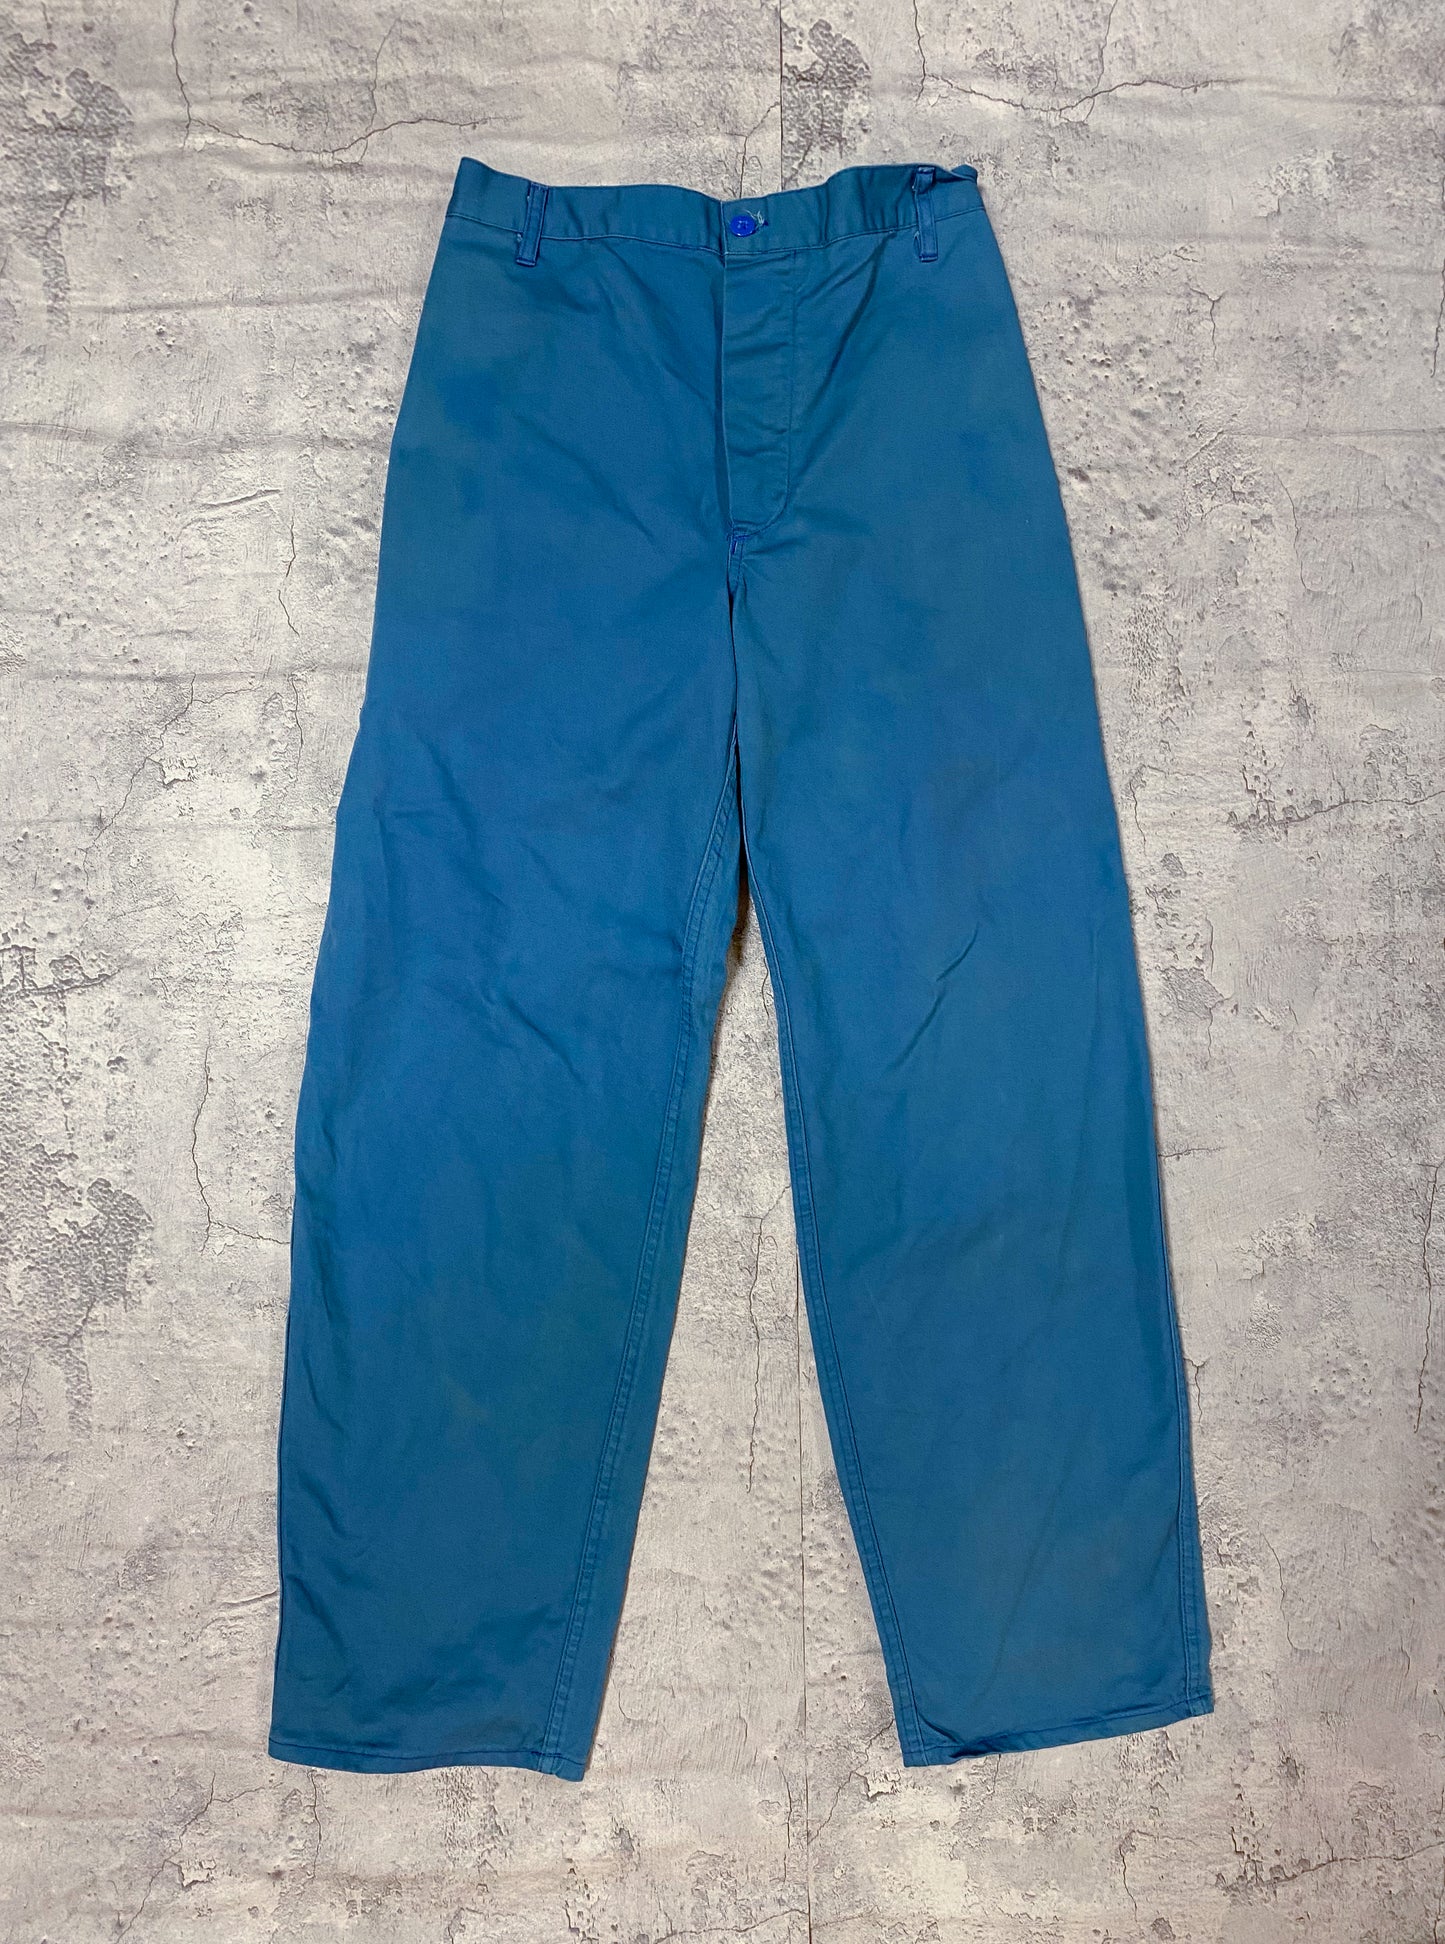 EURO French Work Pants vintage 80s